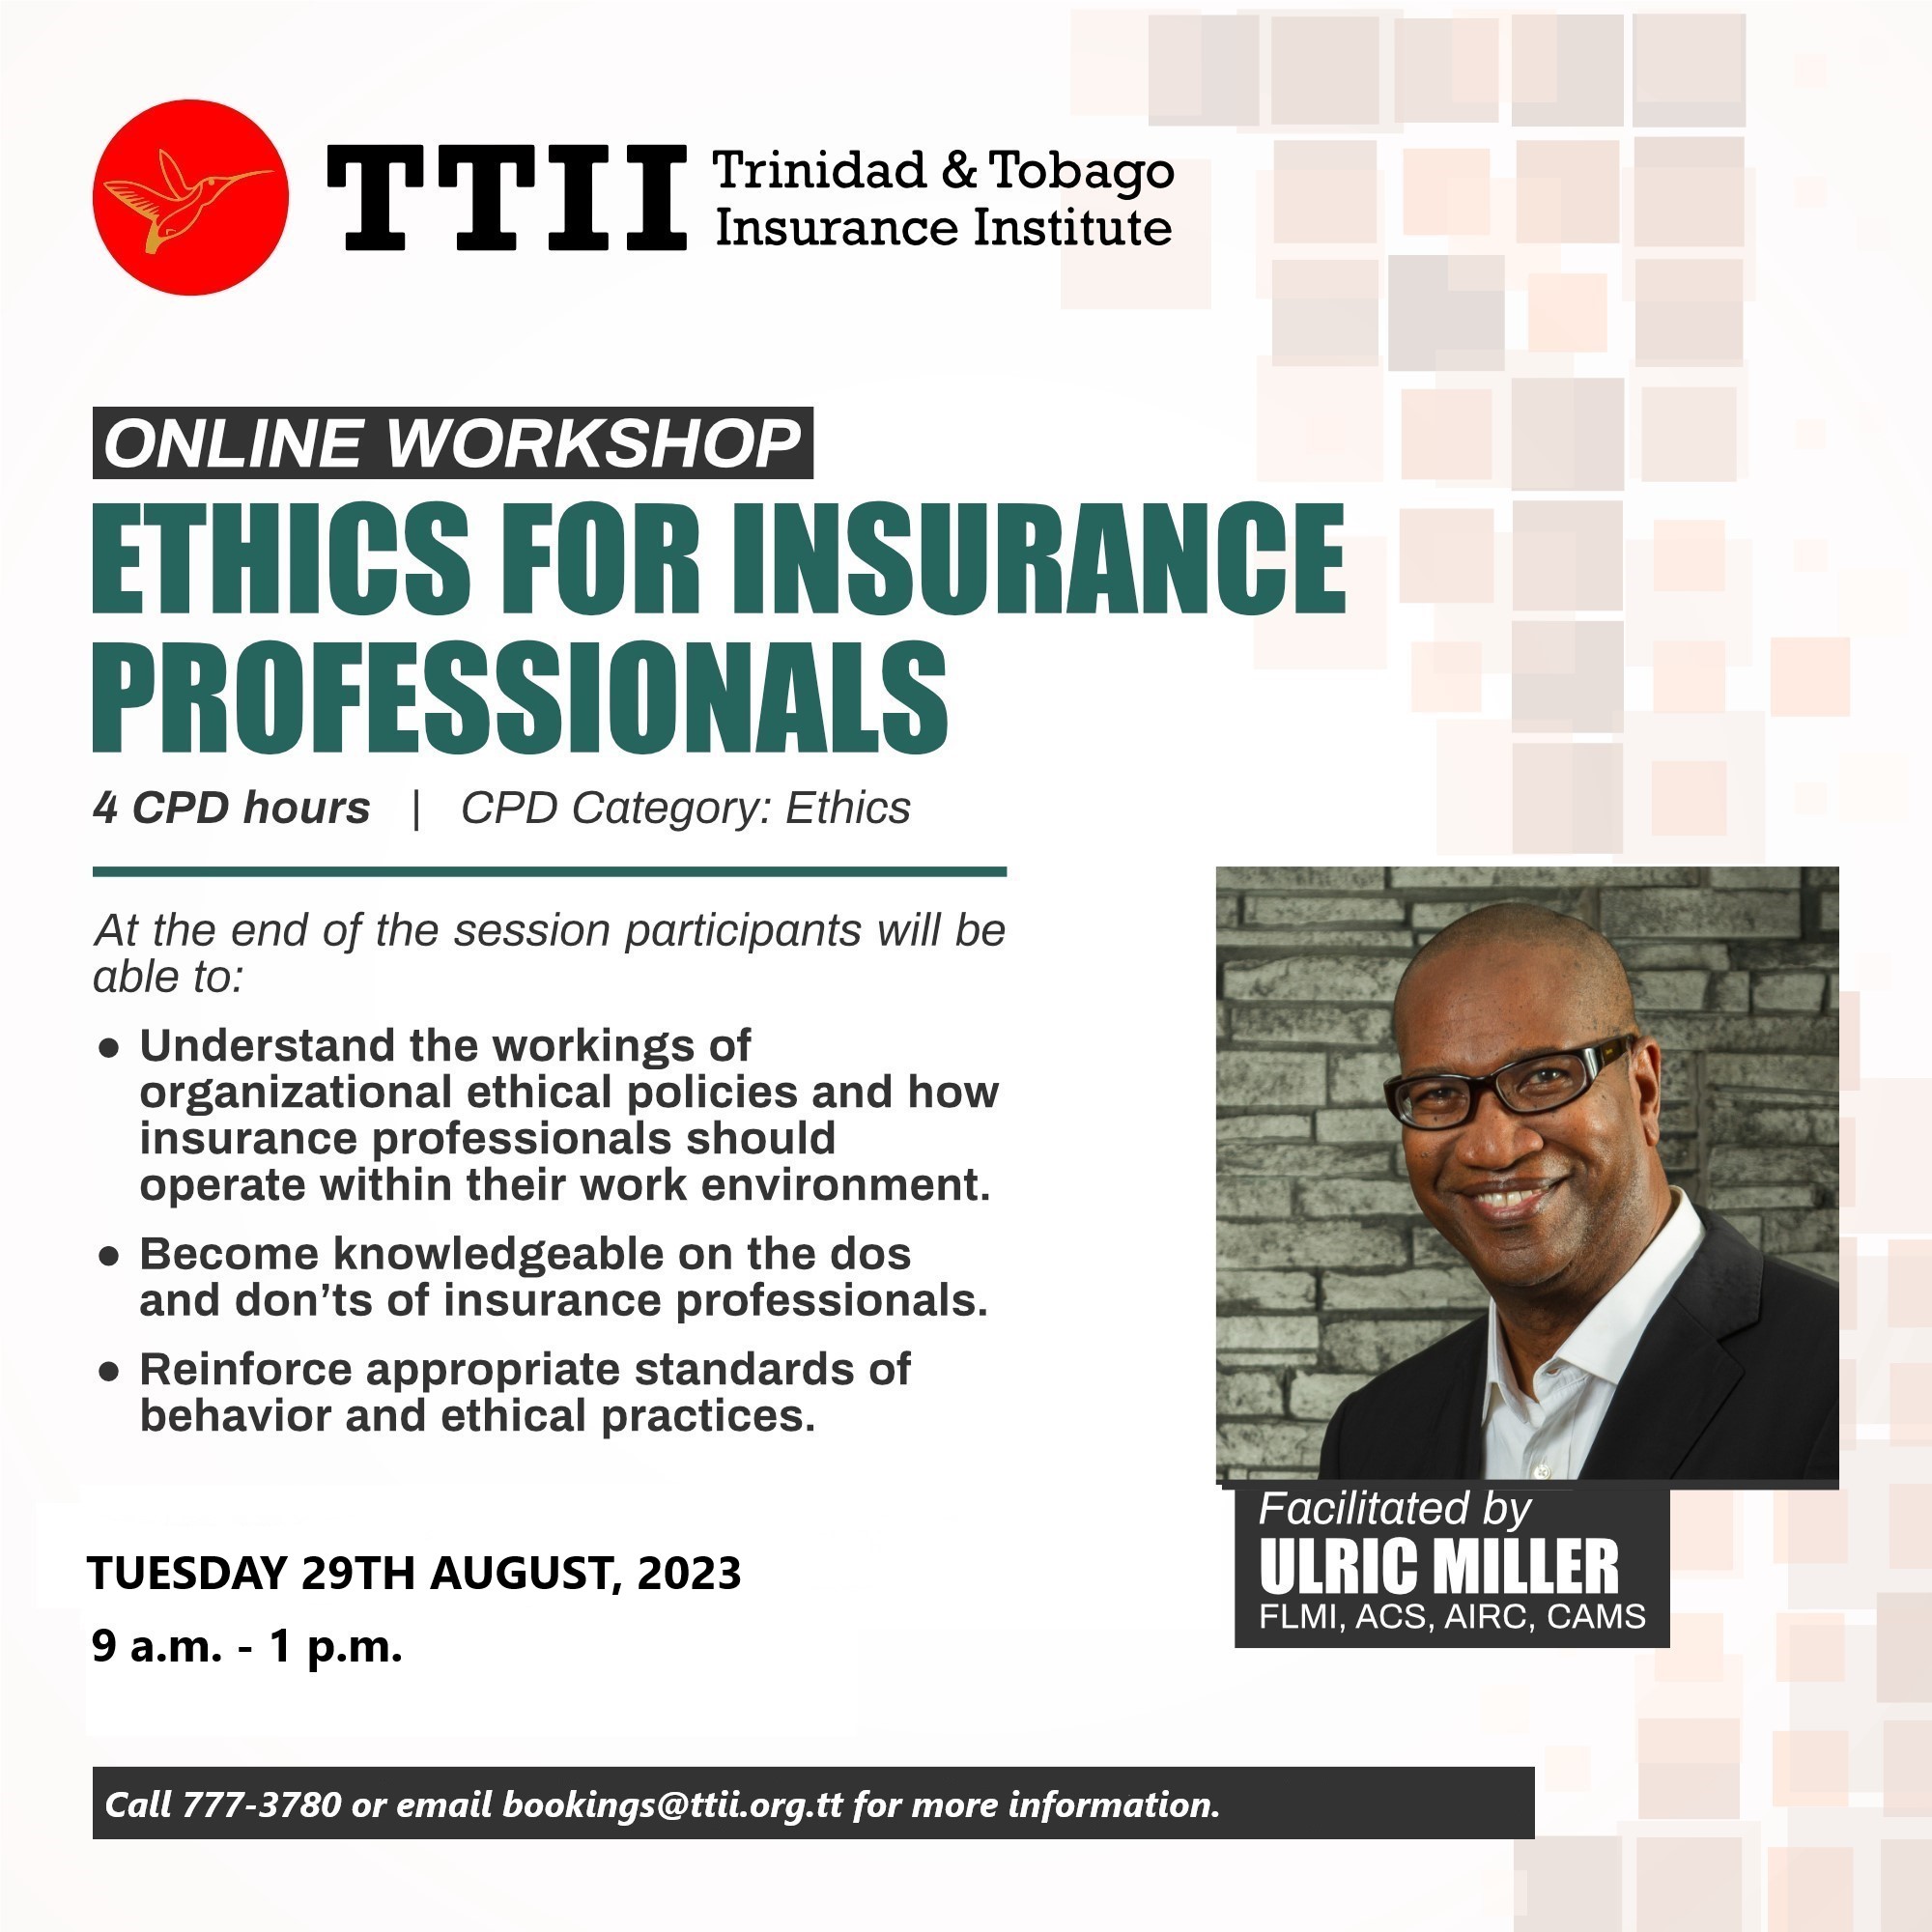 Ethics for Insurance Professionals